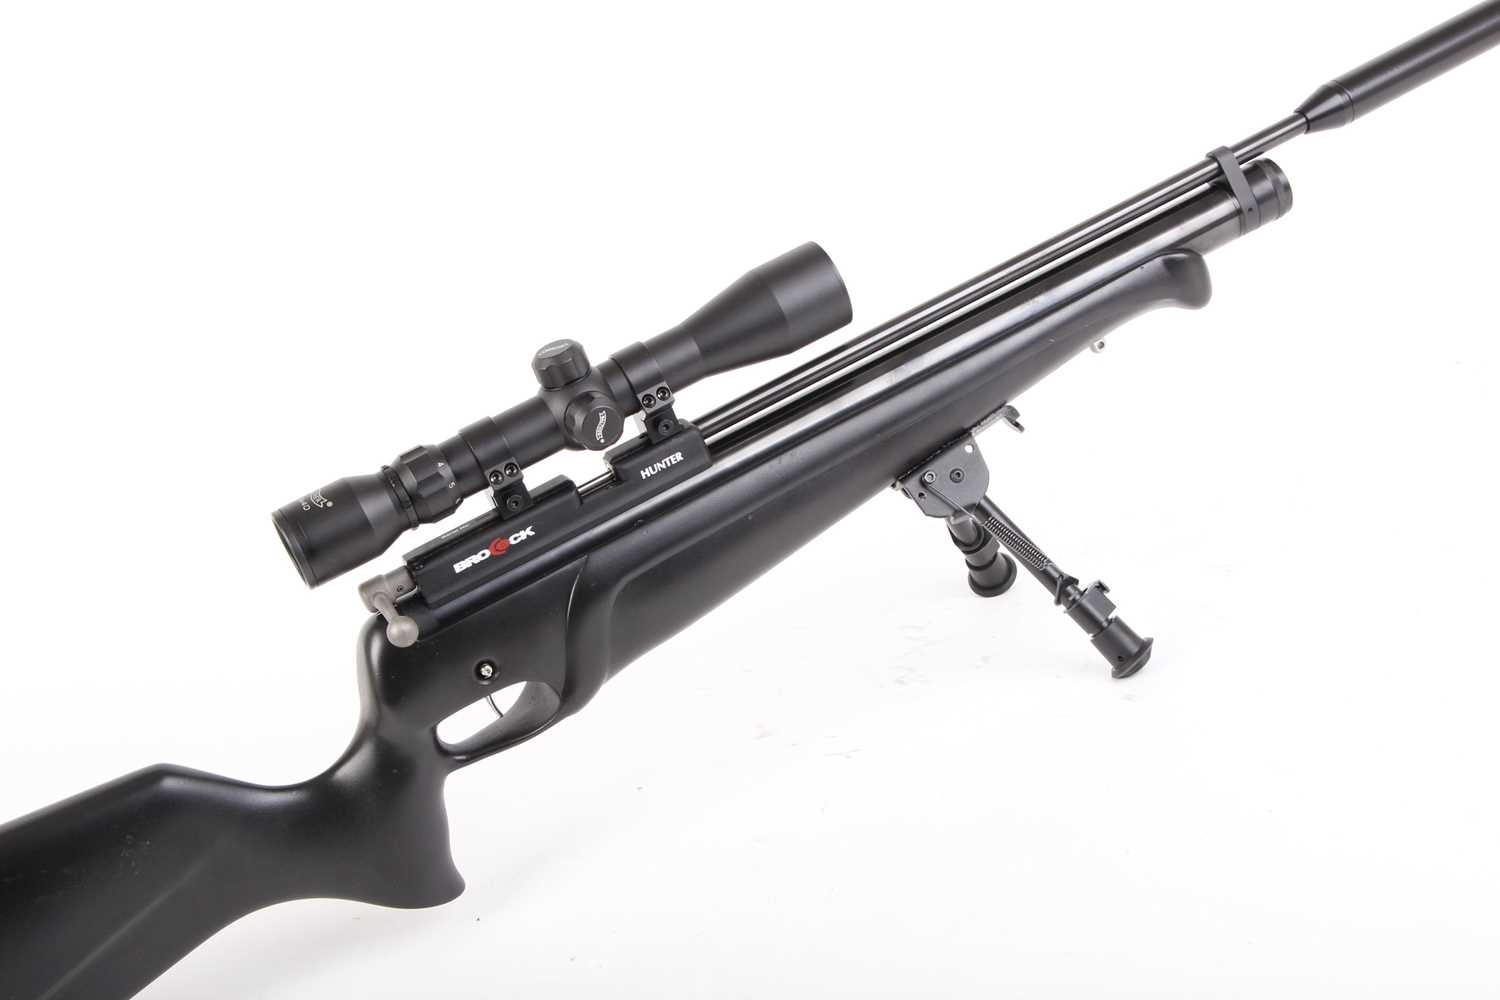 .22 Brocock Hunter PCP bolt-action air rifle, single shot, fitted moderator, mounted 3-9x40